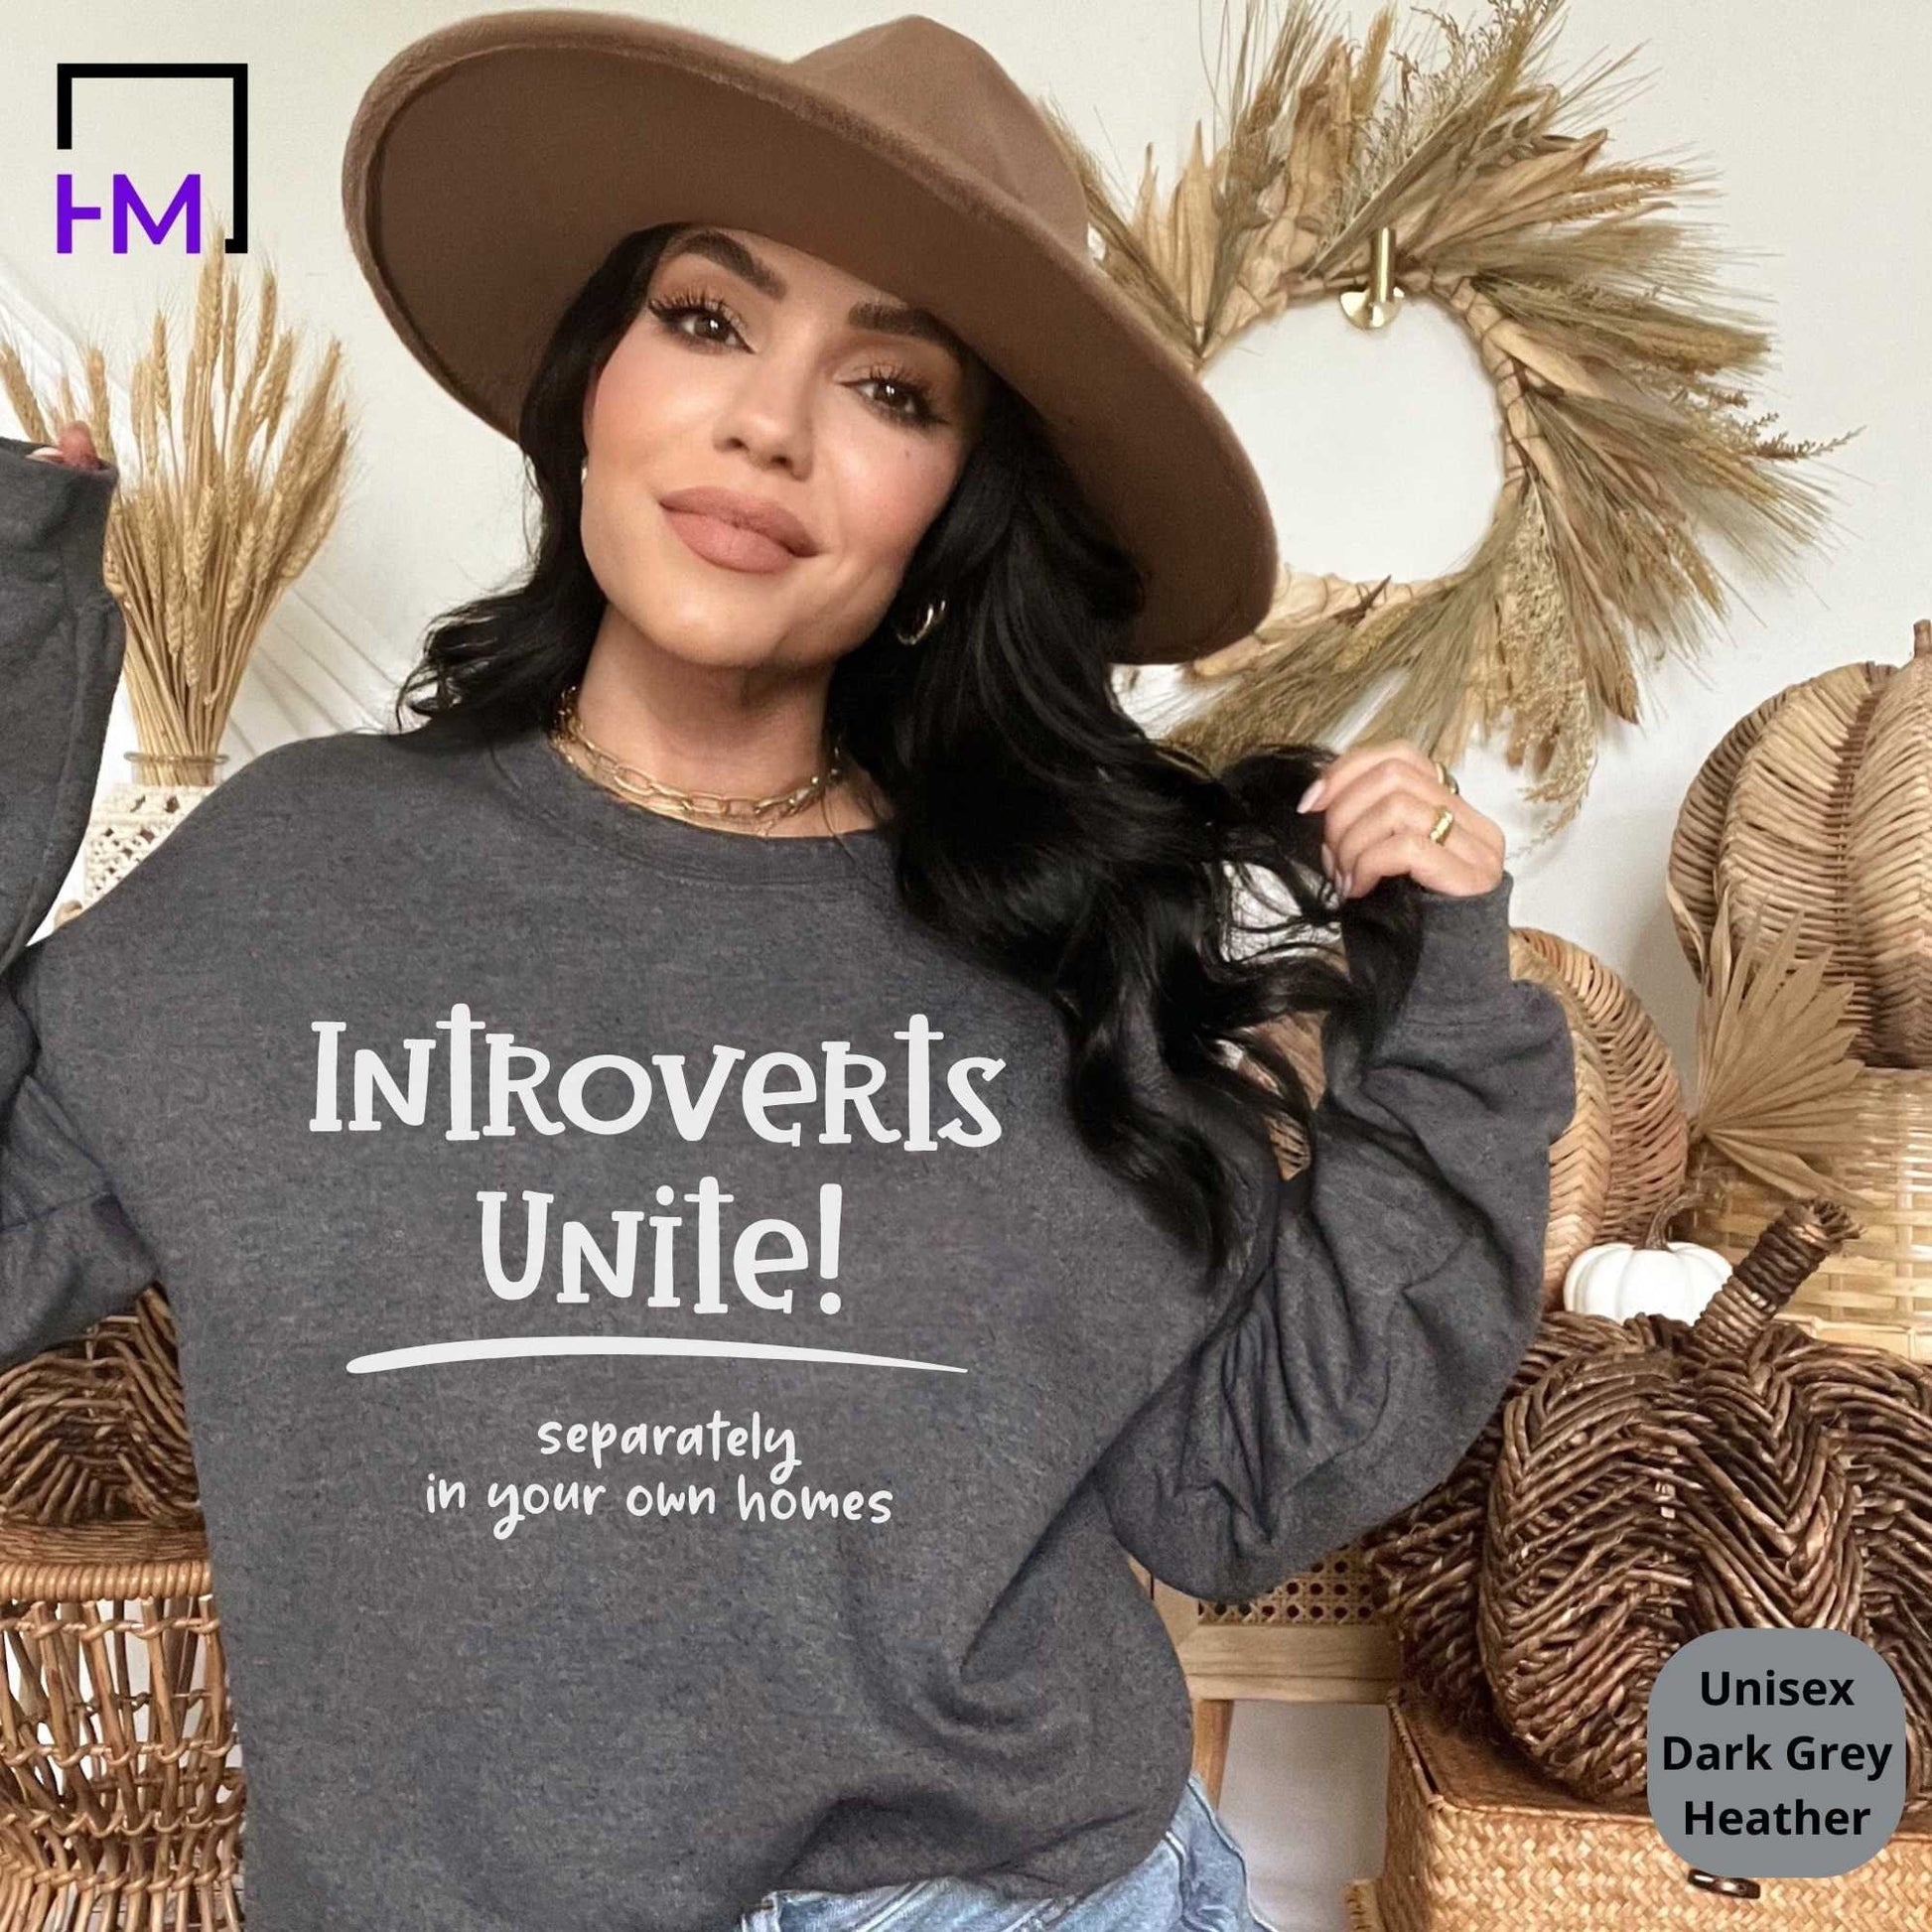 Introvert Shirt, Gift for Introvert, Introverts Unite Shirt, Funny Shirts for Women and Men, Indoorsy Shirt, Antisocial Shirt, Humor Shirt